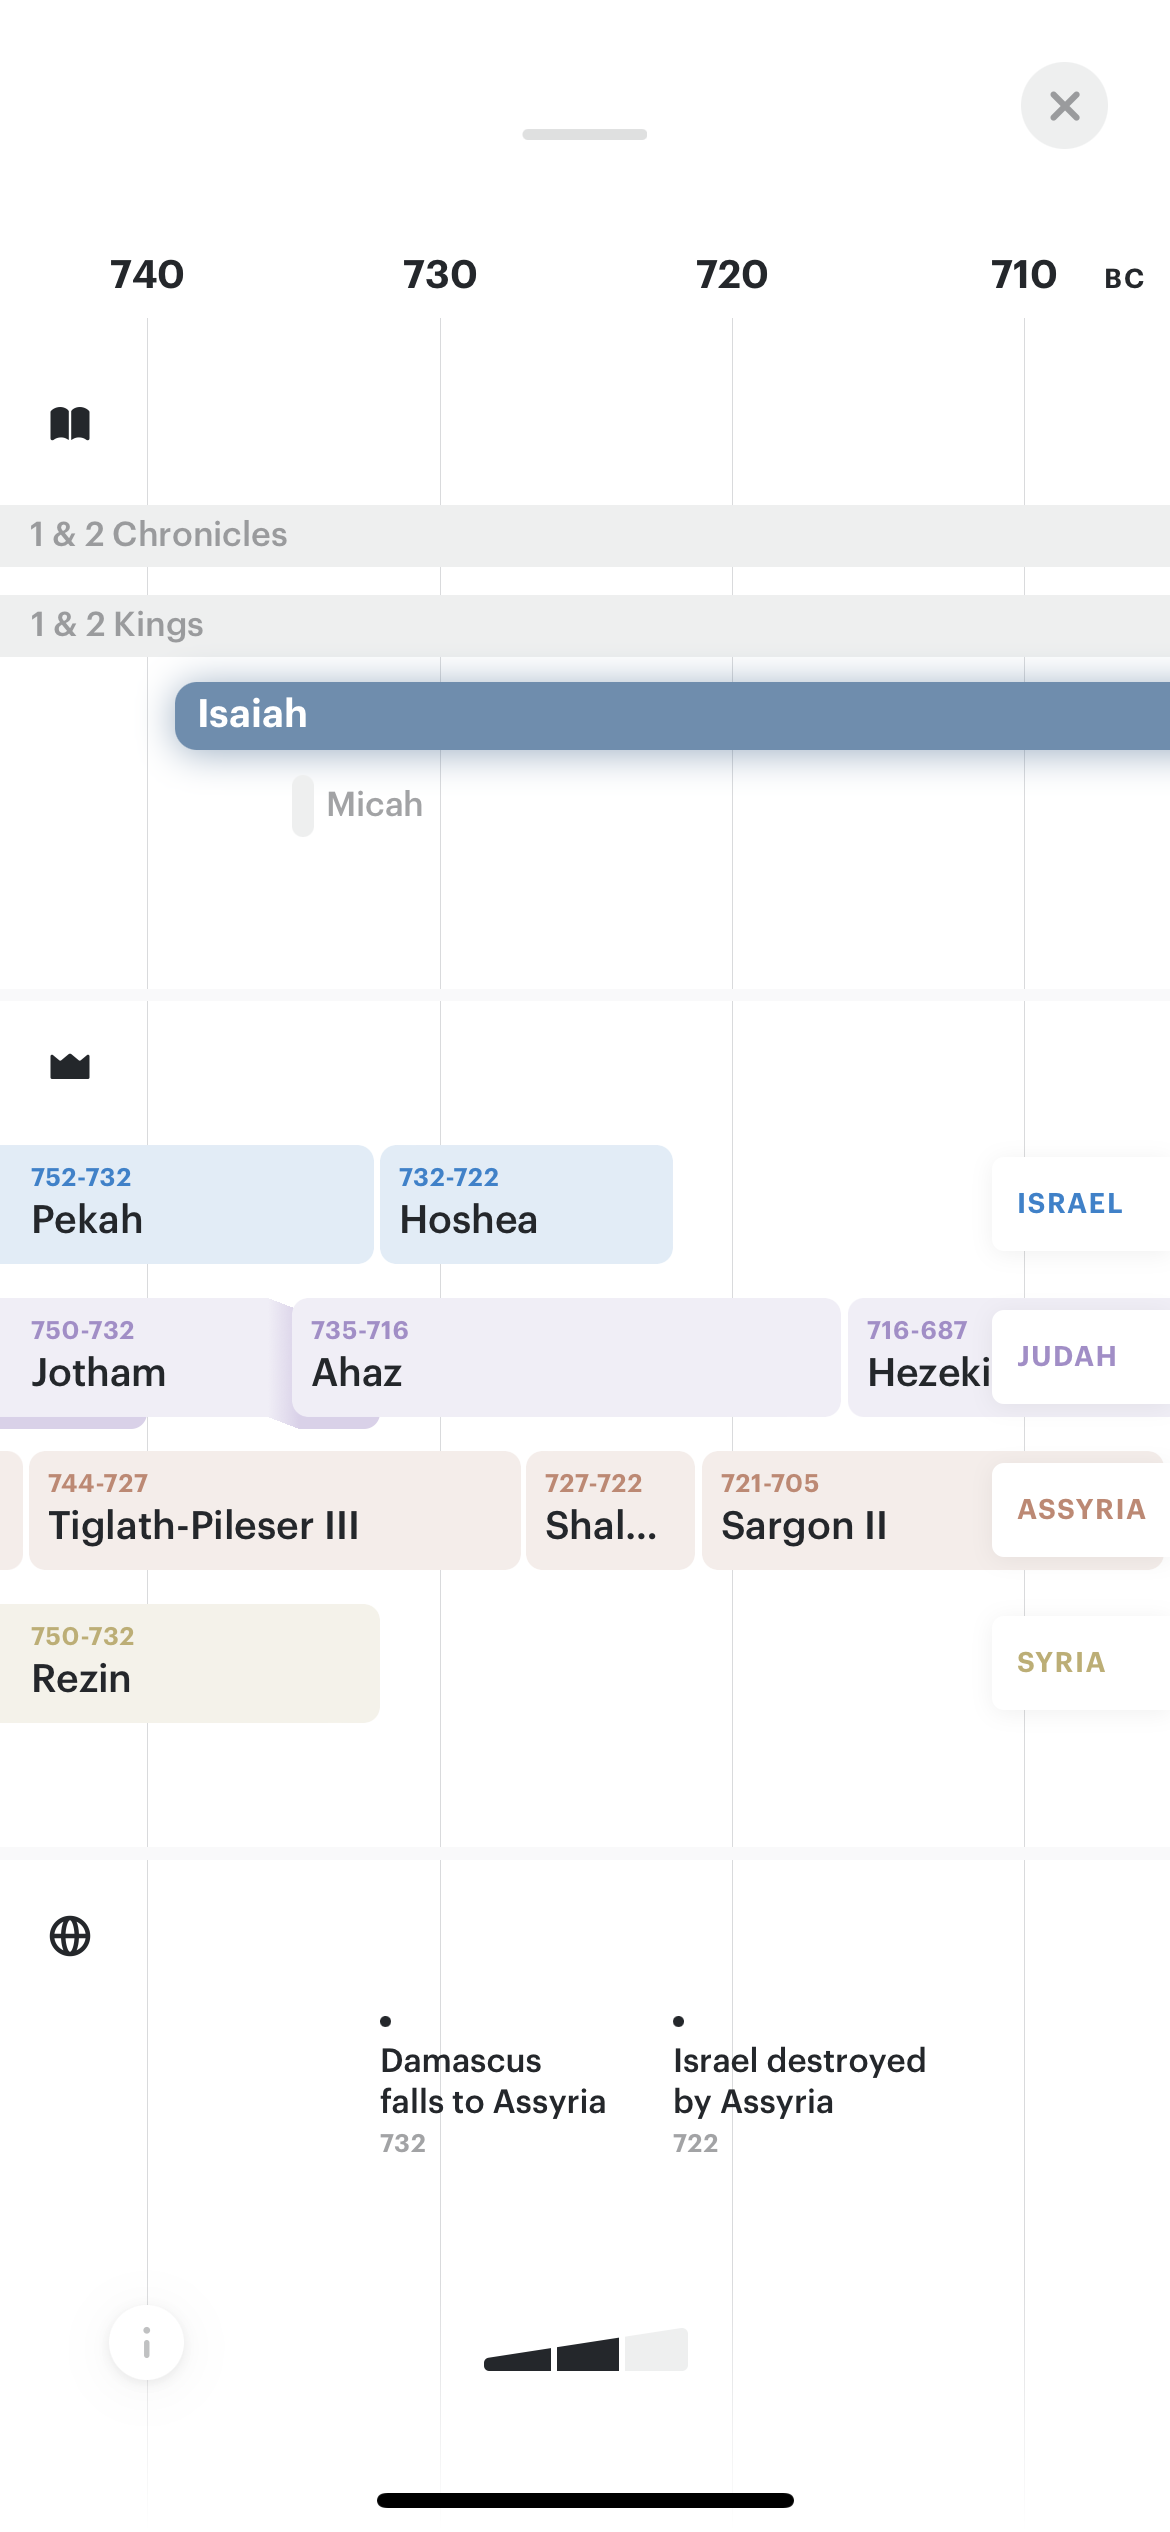 The Bible timeline in the Sola app.